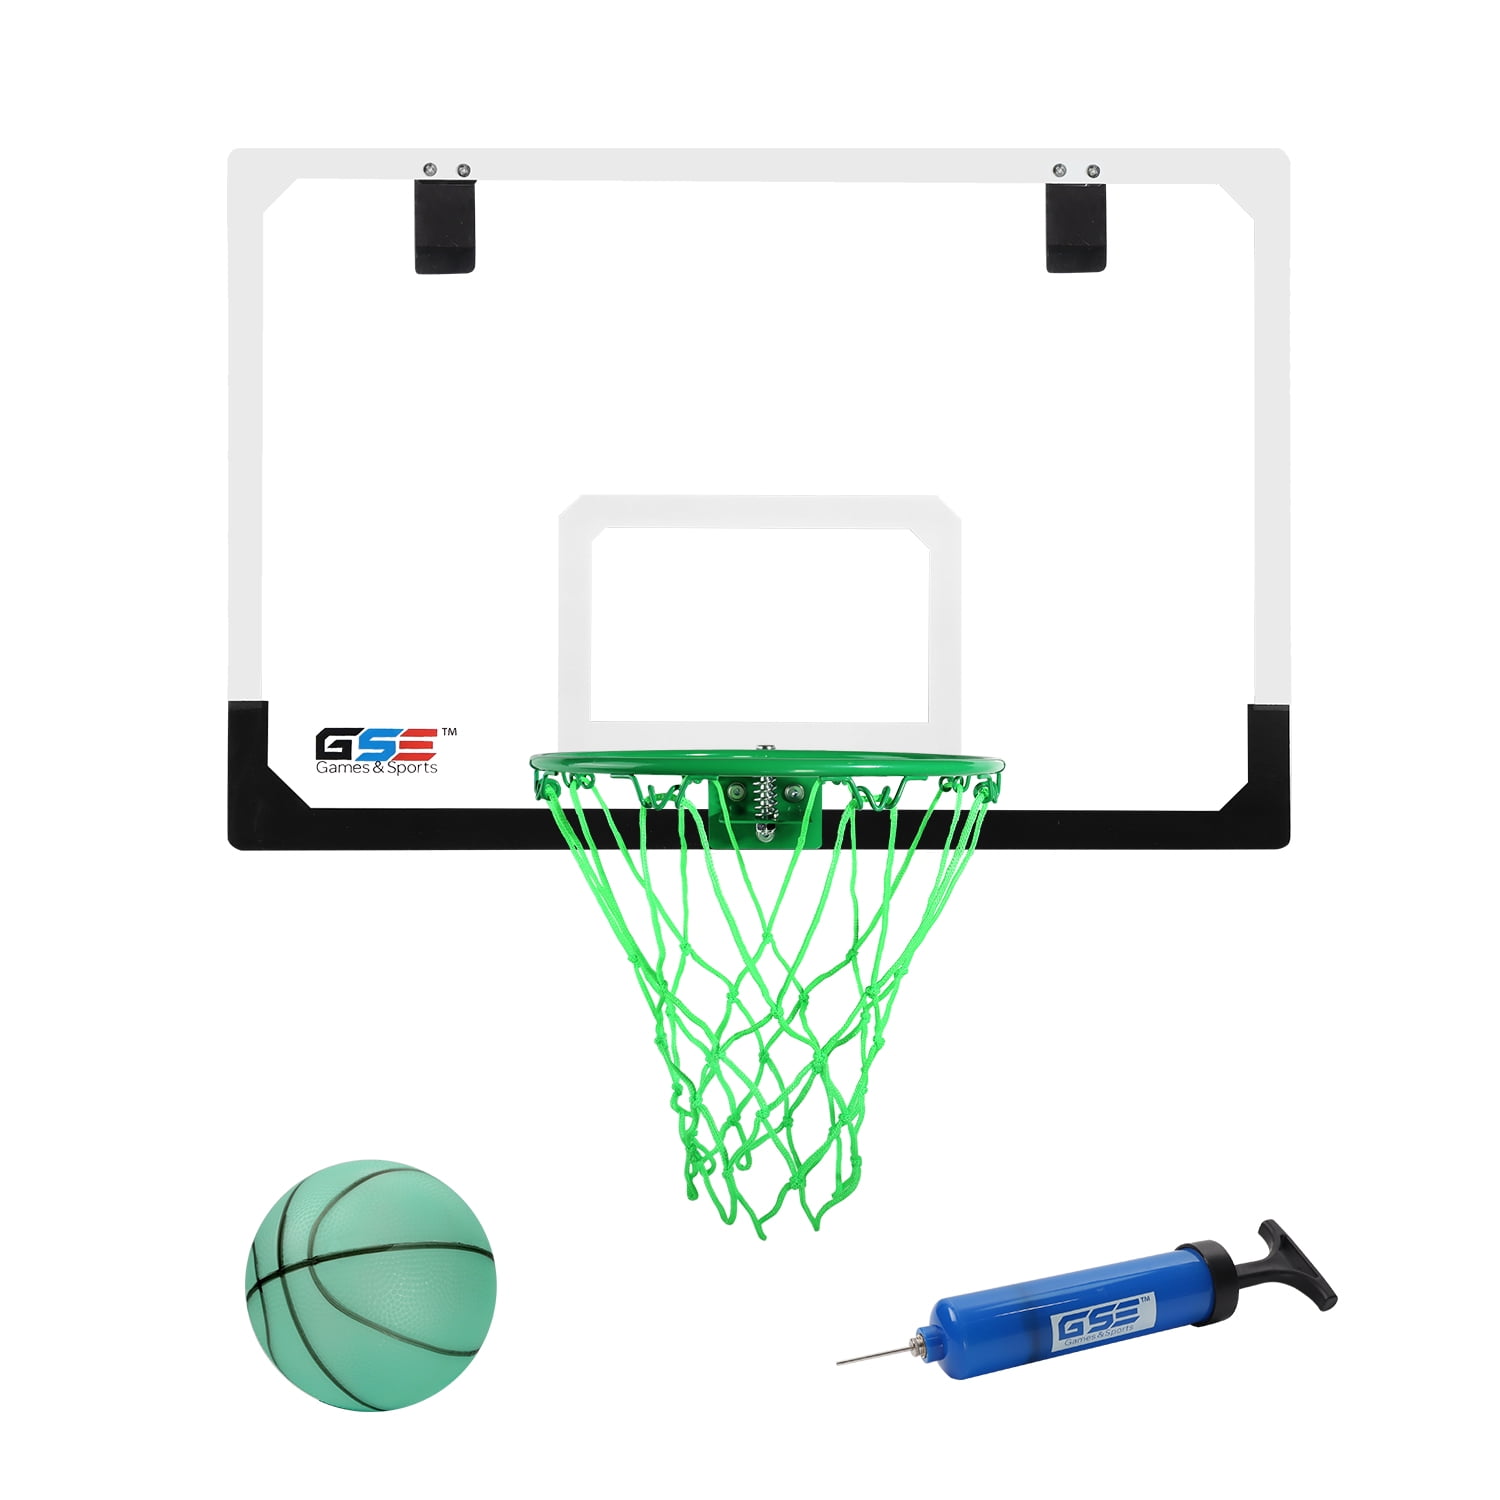 GSE Games and Sports Expert Over-The-Door Pro Basketball Hoop Set with Basketball and Pump, Wall-Mounted Basketball Hoop Set for Home and Office, Indoor Basketball Game (Large